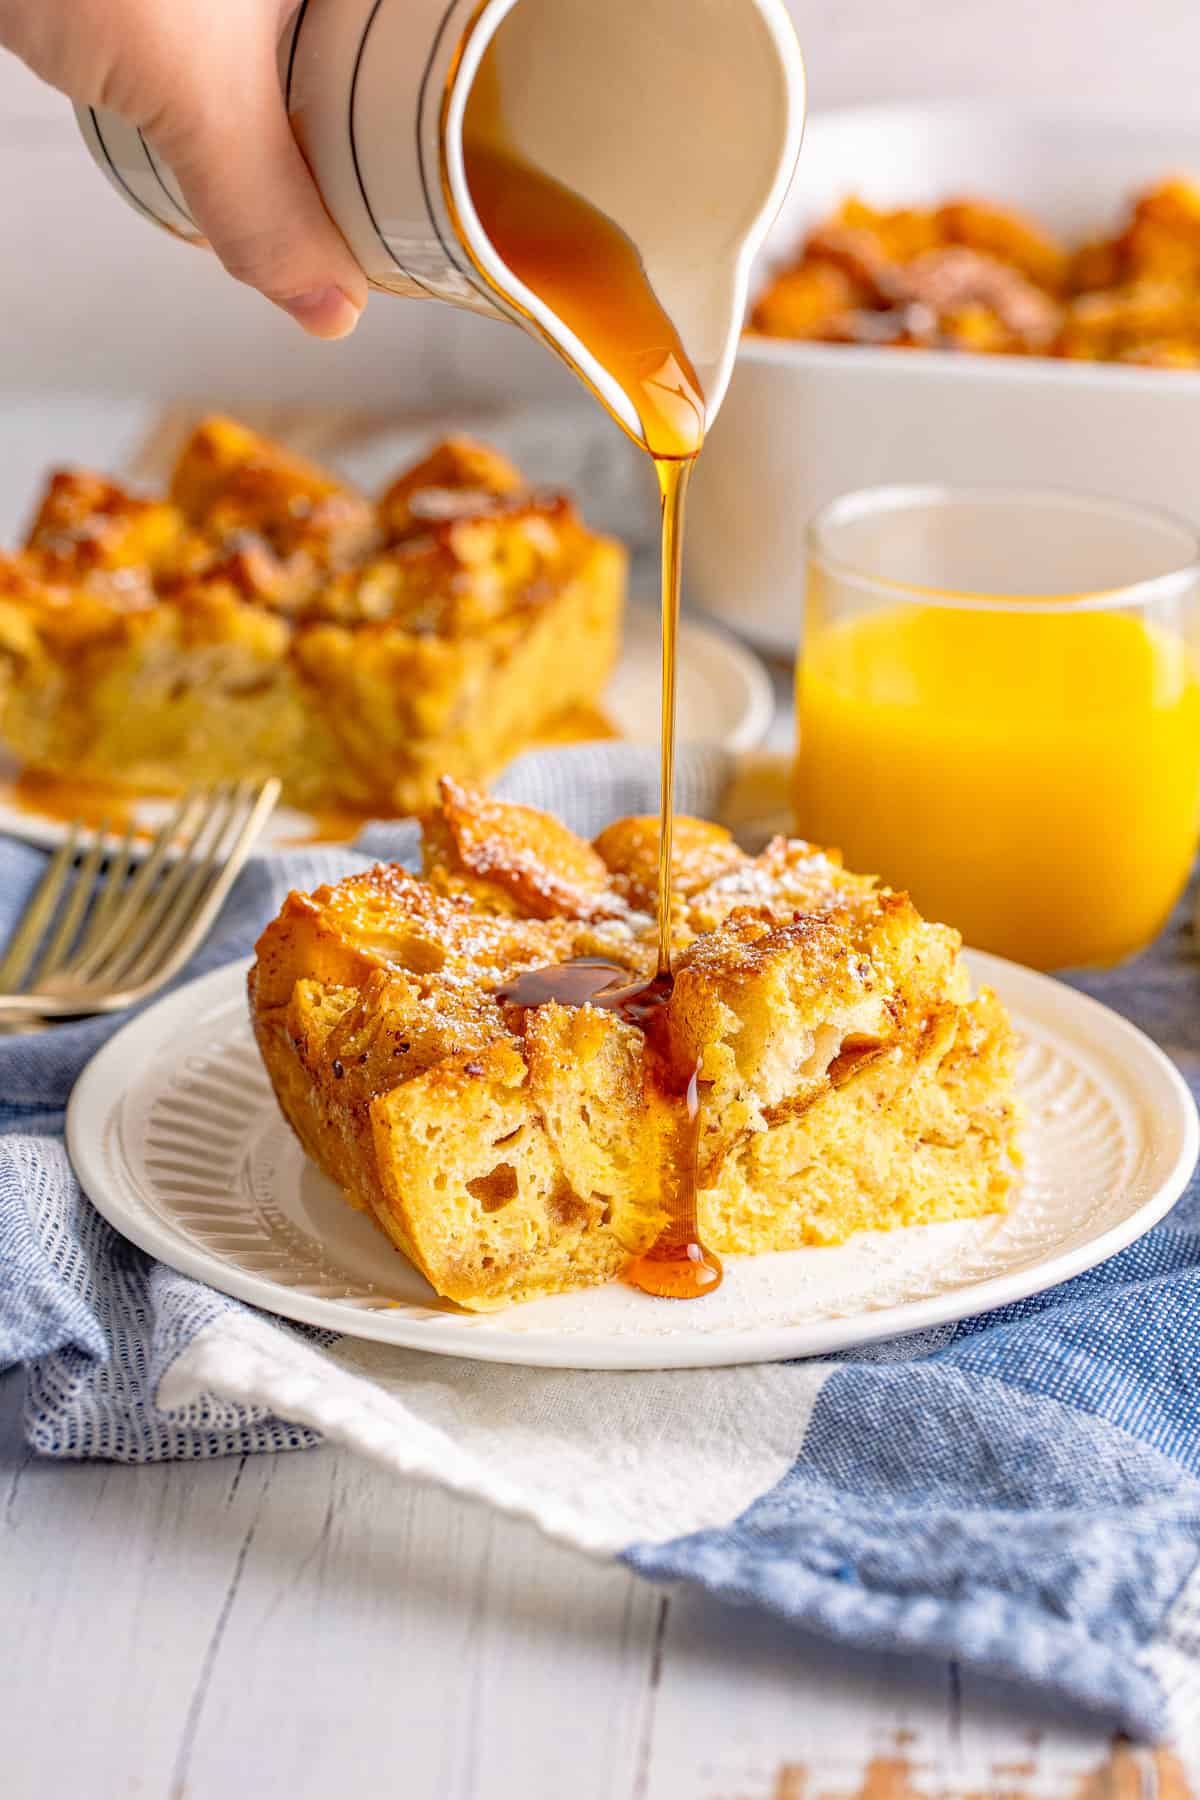 Slice of French toast casserole on white plate with maple syrup being poured over the top. Glass of orange juice and another piece of the bake are in background.